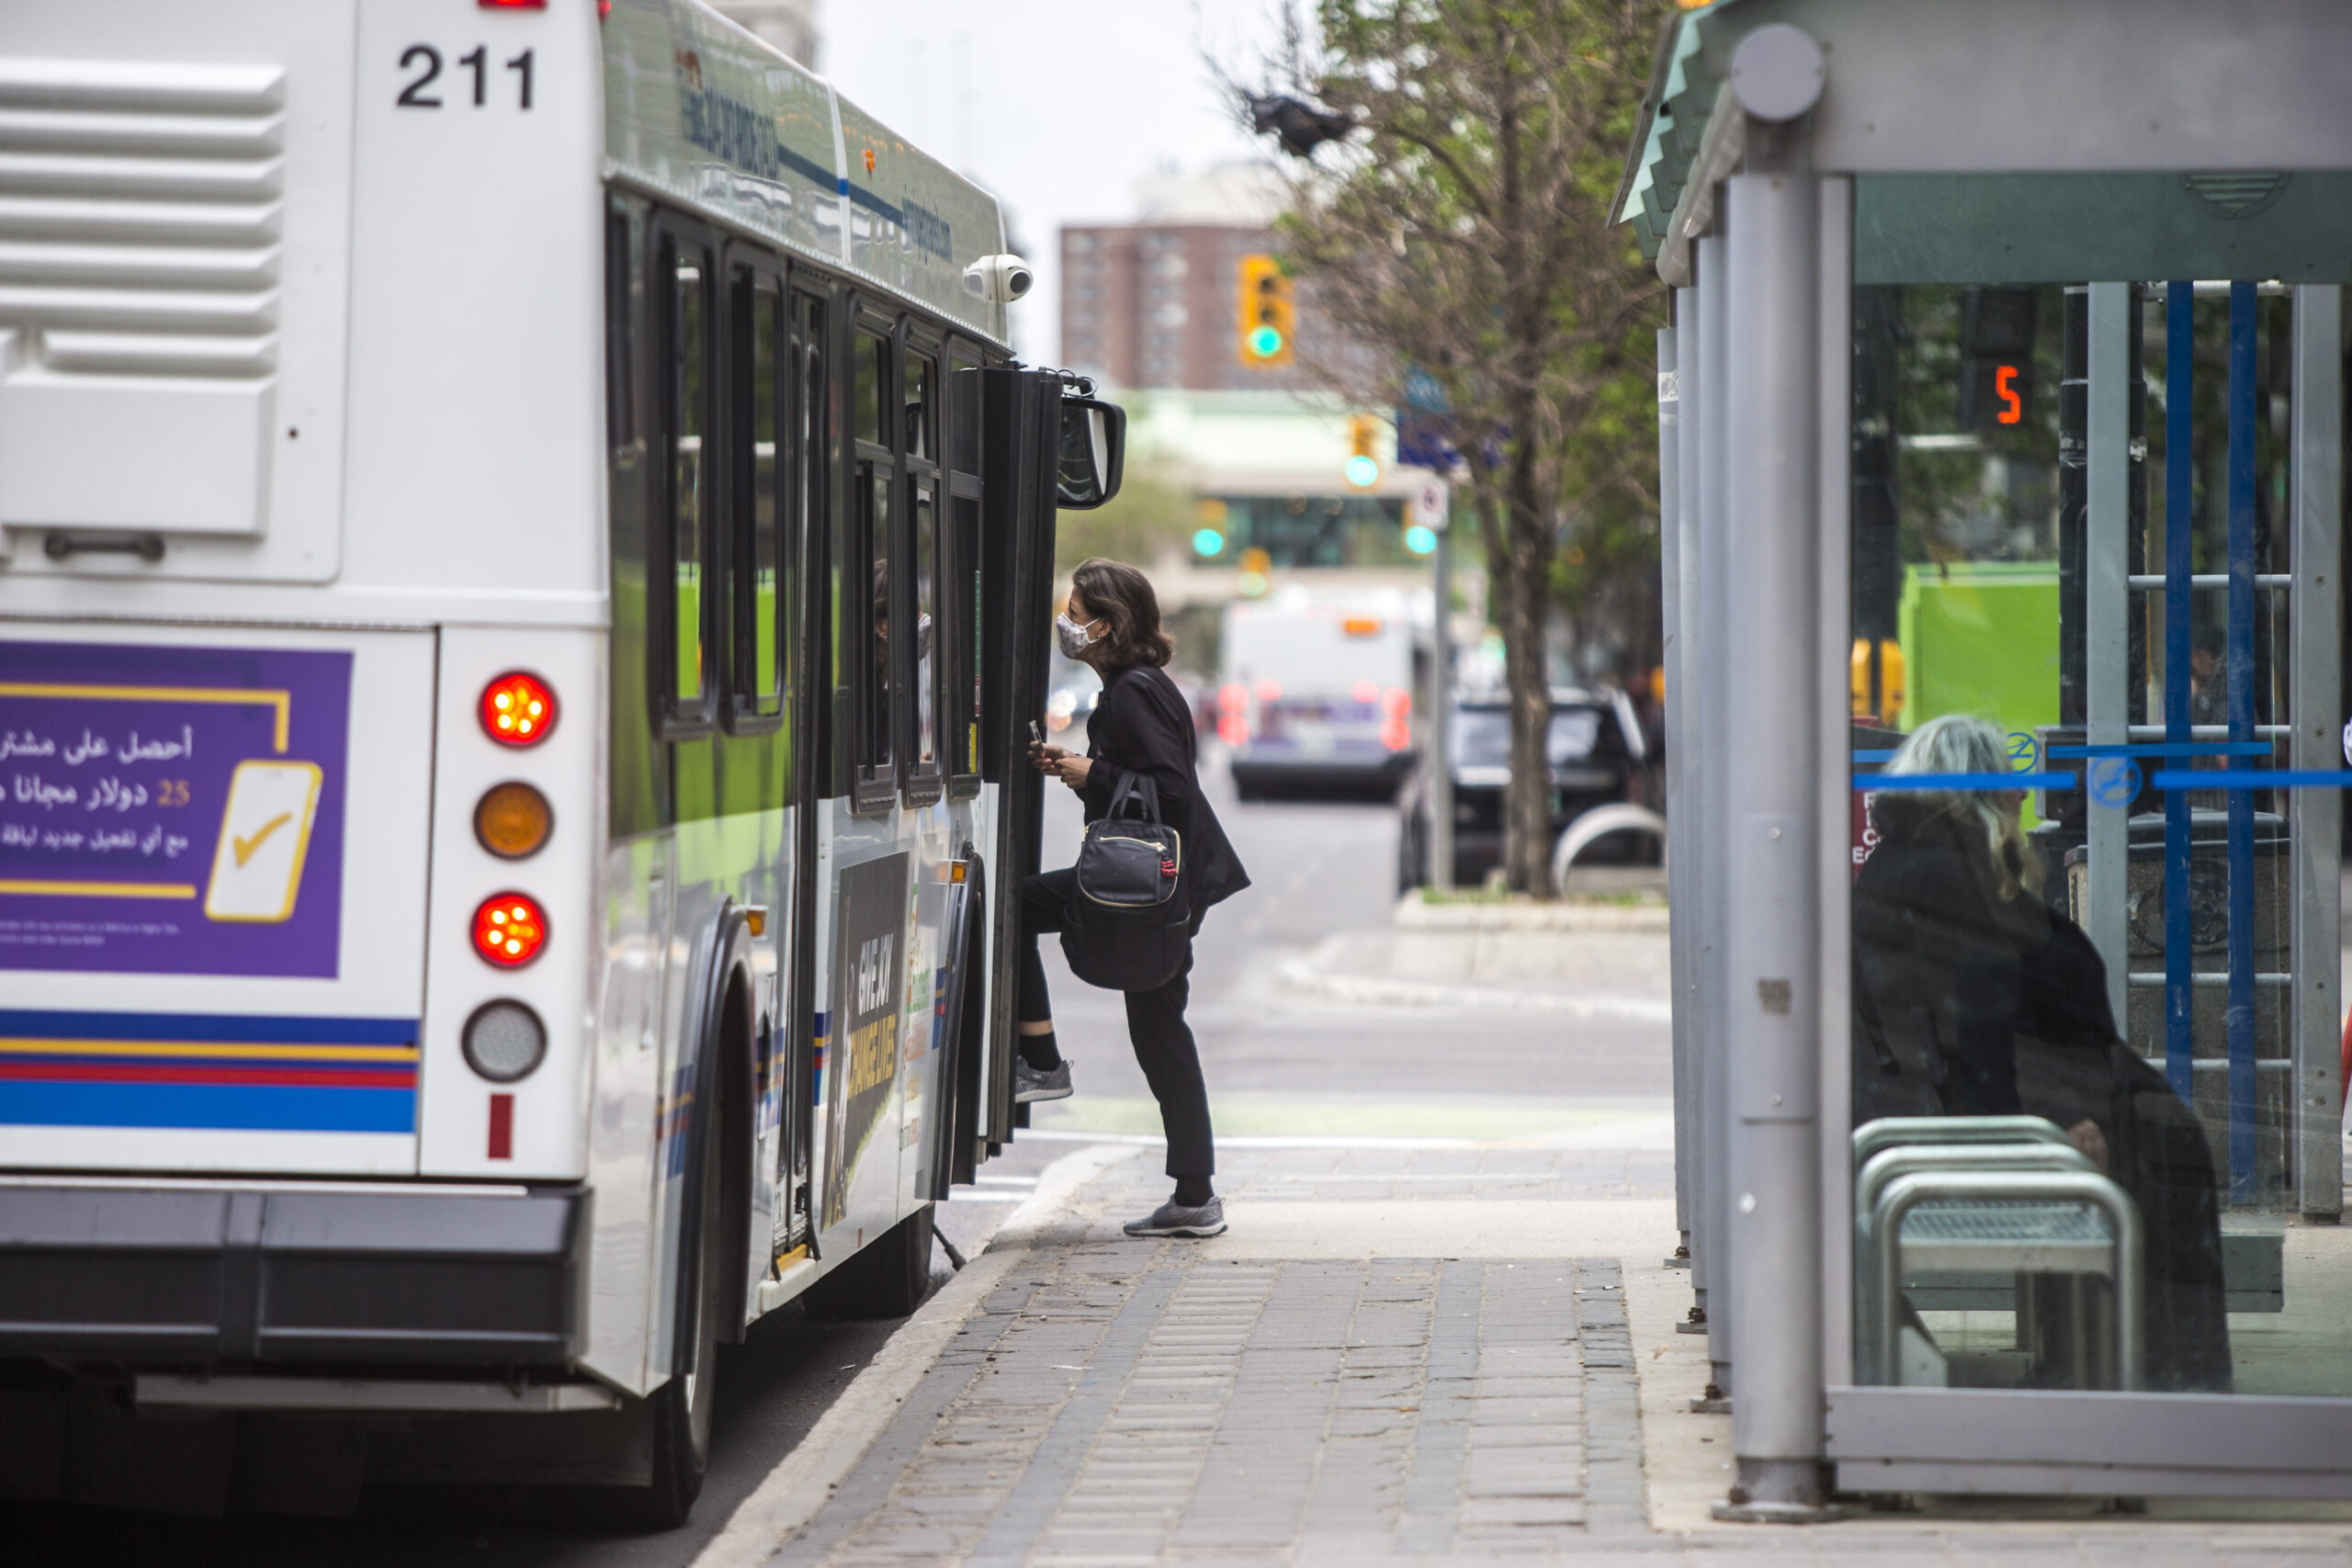 Winnipeg election: A woman in dark clothing boards a Winnipeg transit bus in front of a bus shelter